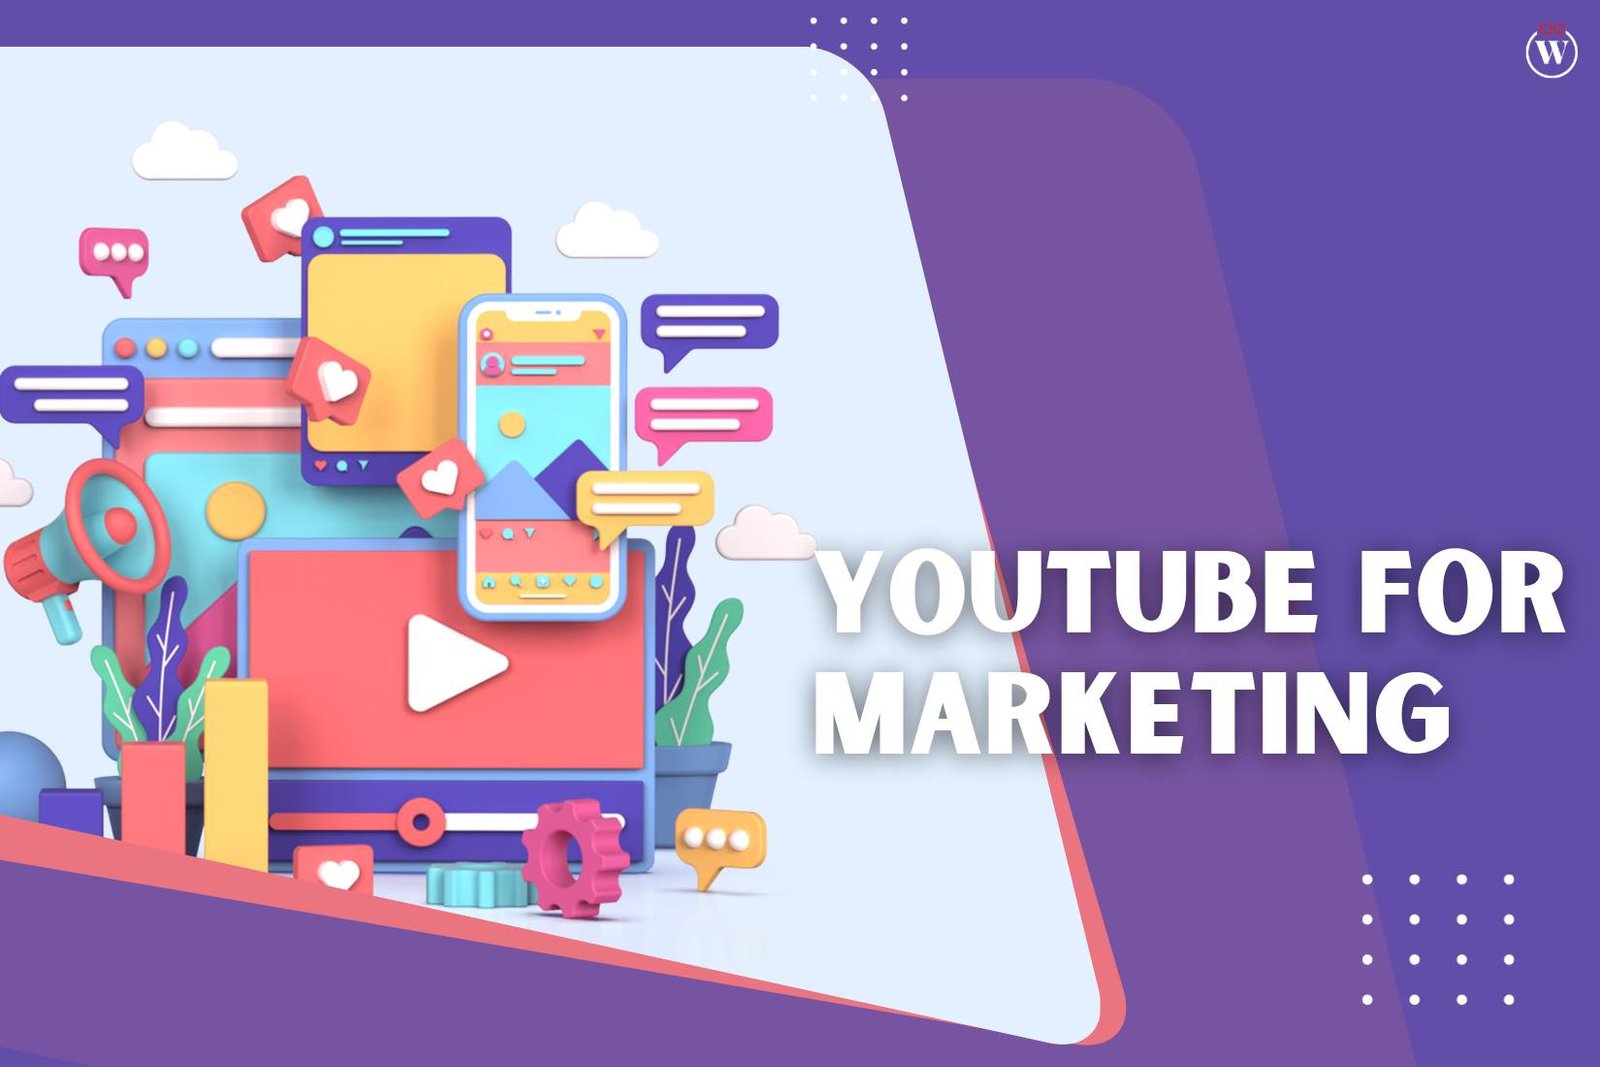 How to Use YouTube for Marketing and Branding?